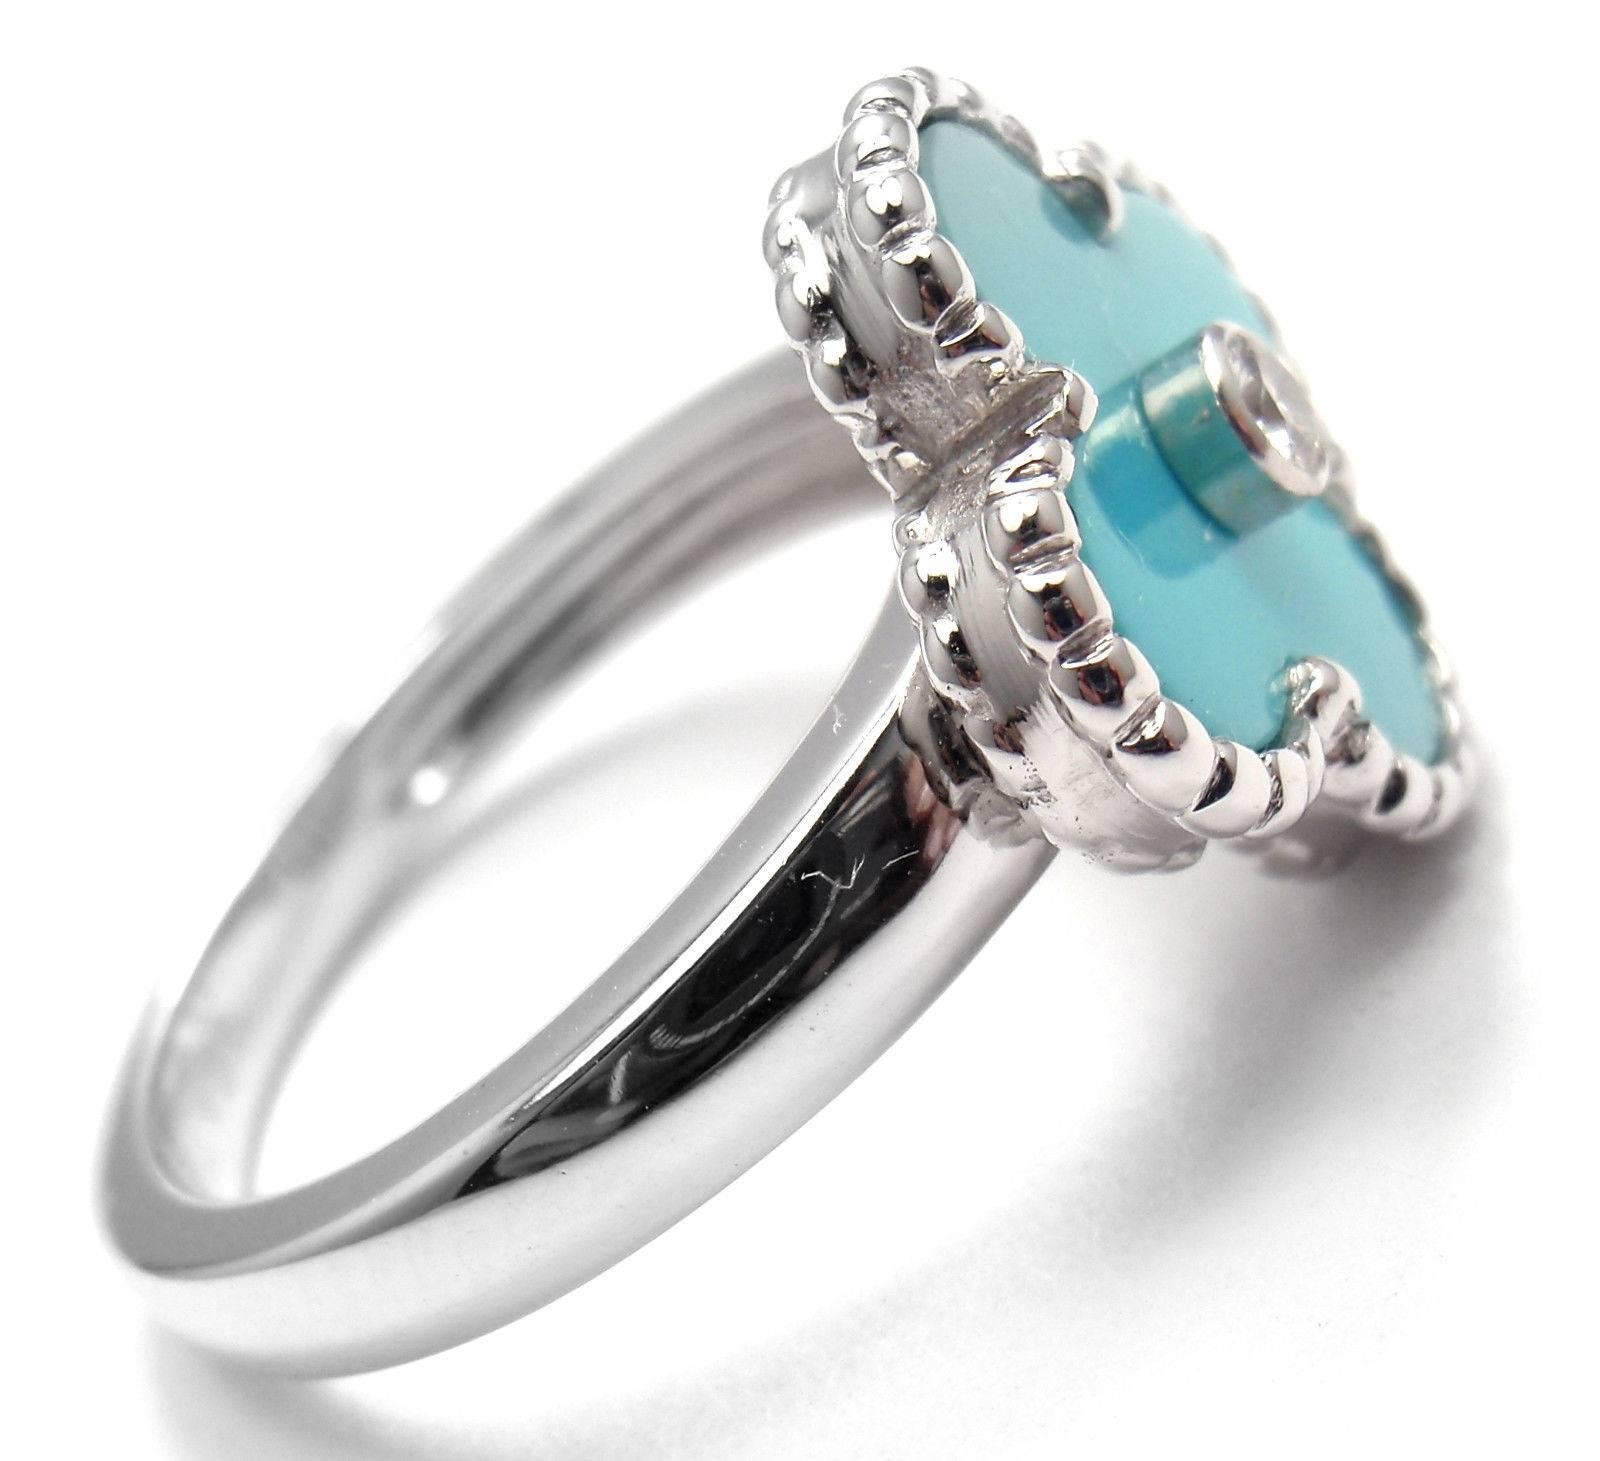 Van Cleef & Arpels Vintage Alhambra 18k White Gold Diamond Turquoise Ring.
With 1 Round brilliant cut diamond .06ct F/VS1
Alhambra cut turquoise.
Details:
Size - European 55, US 7.25
Width: 15mm
Weight: 7.5 grams
Stamped Hallmarks: VCA 750 55